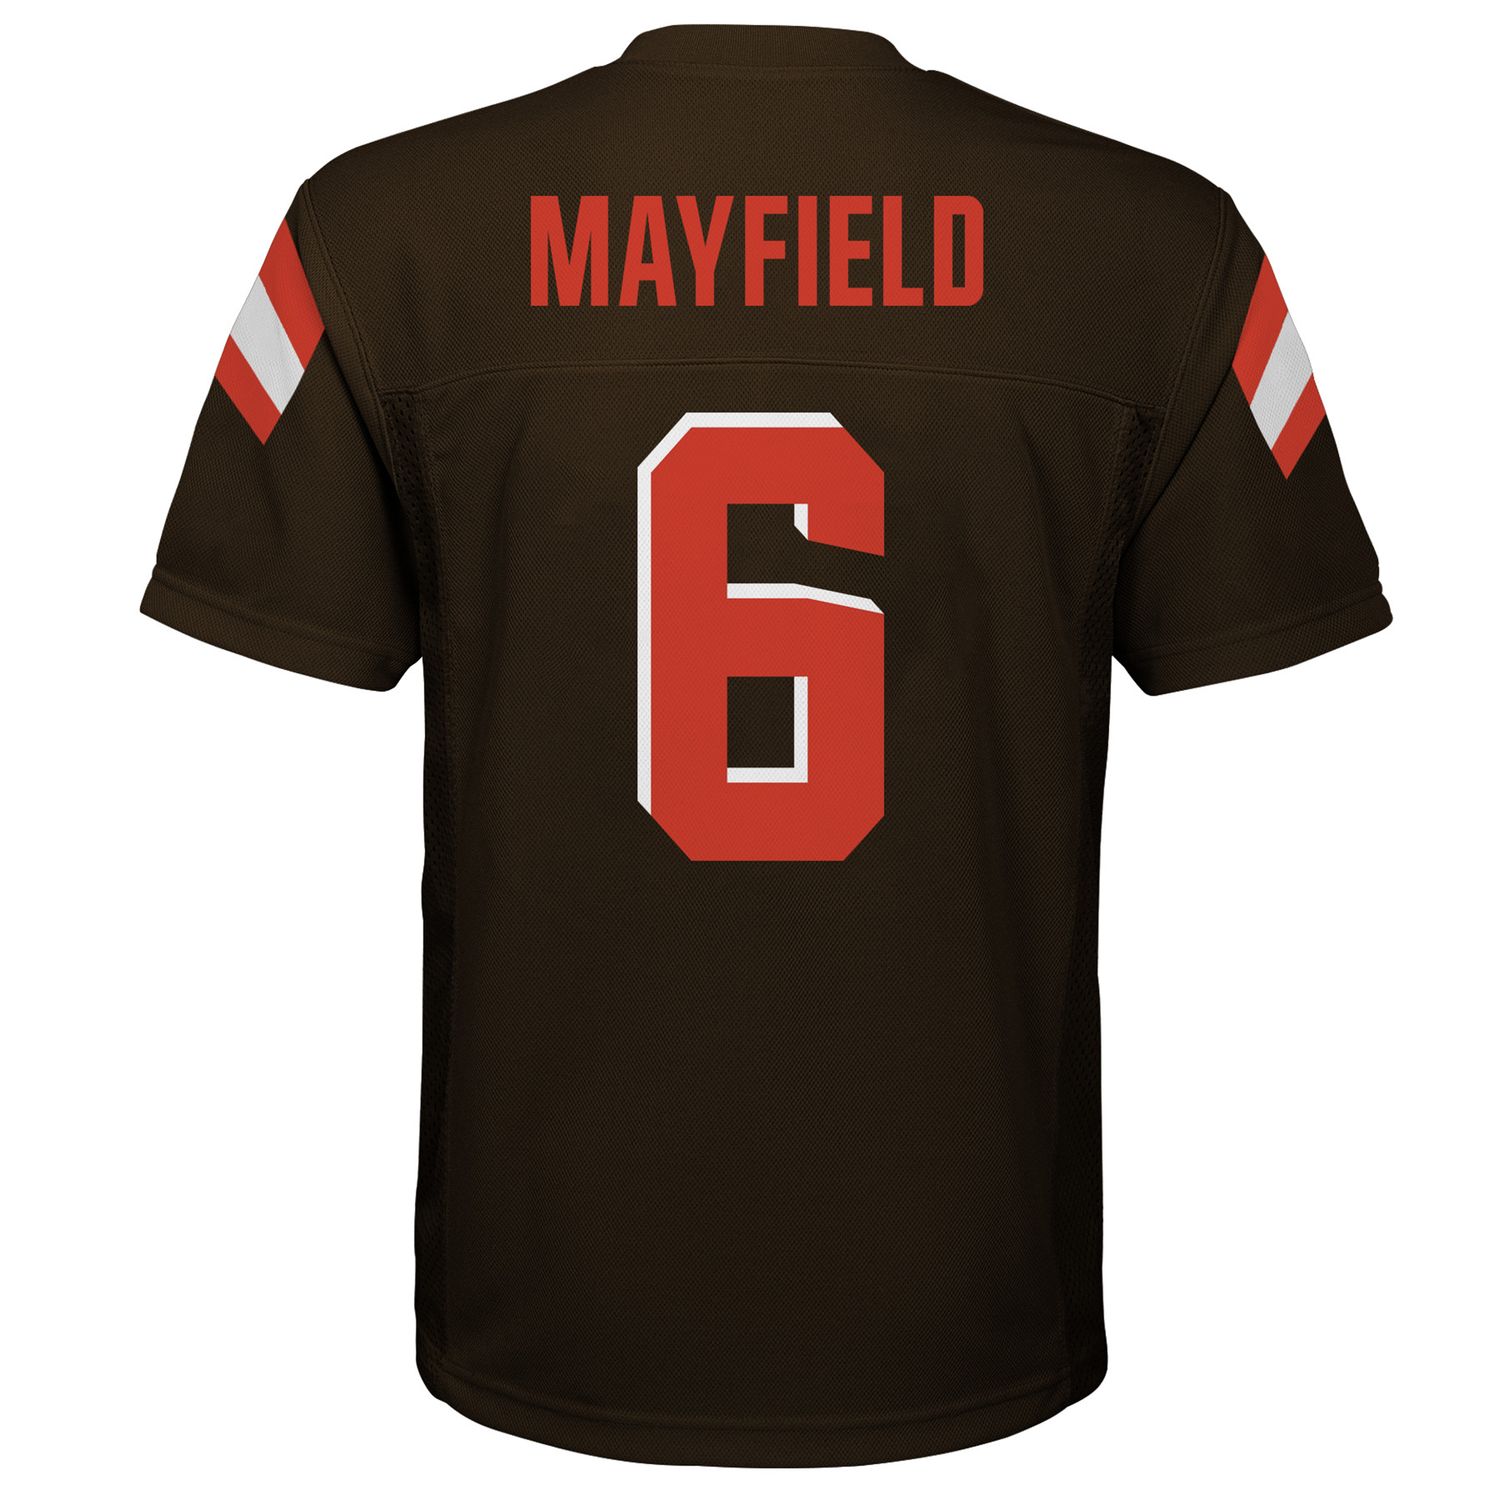 kohl's browns jersey